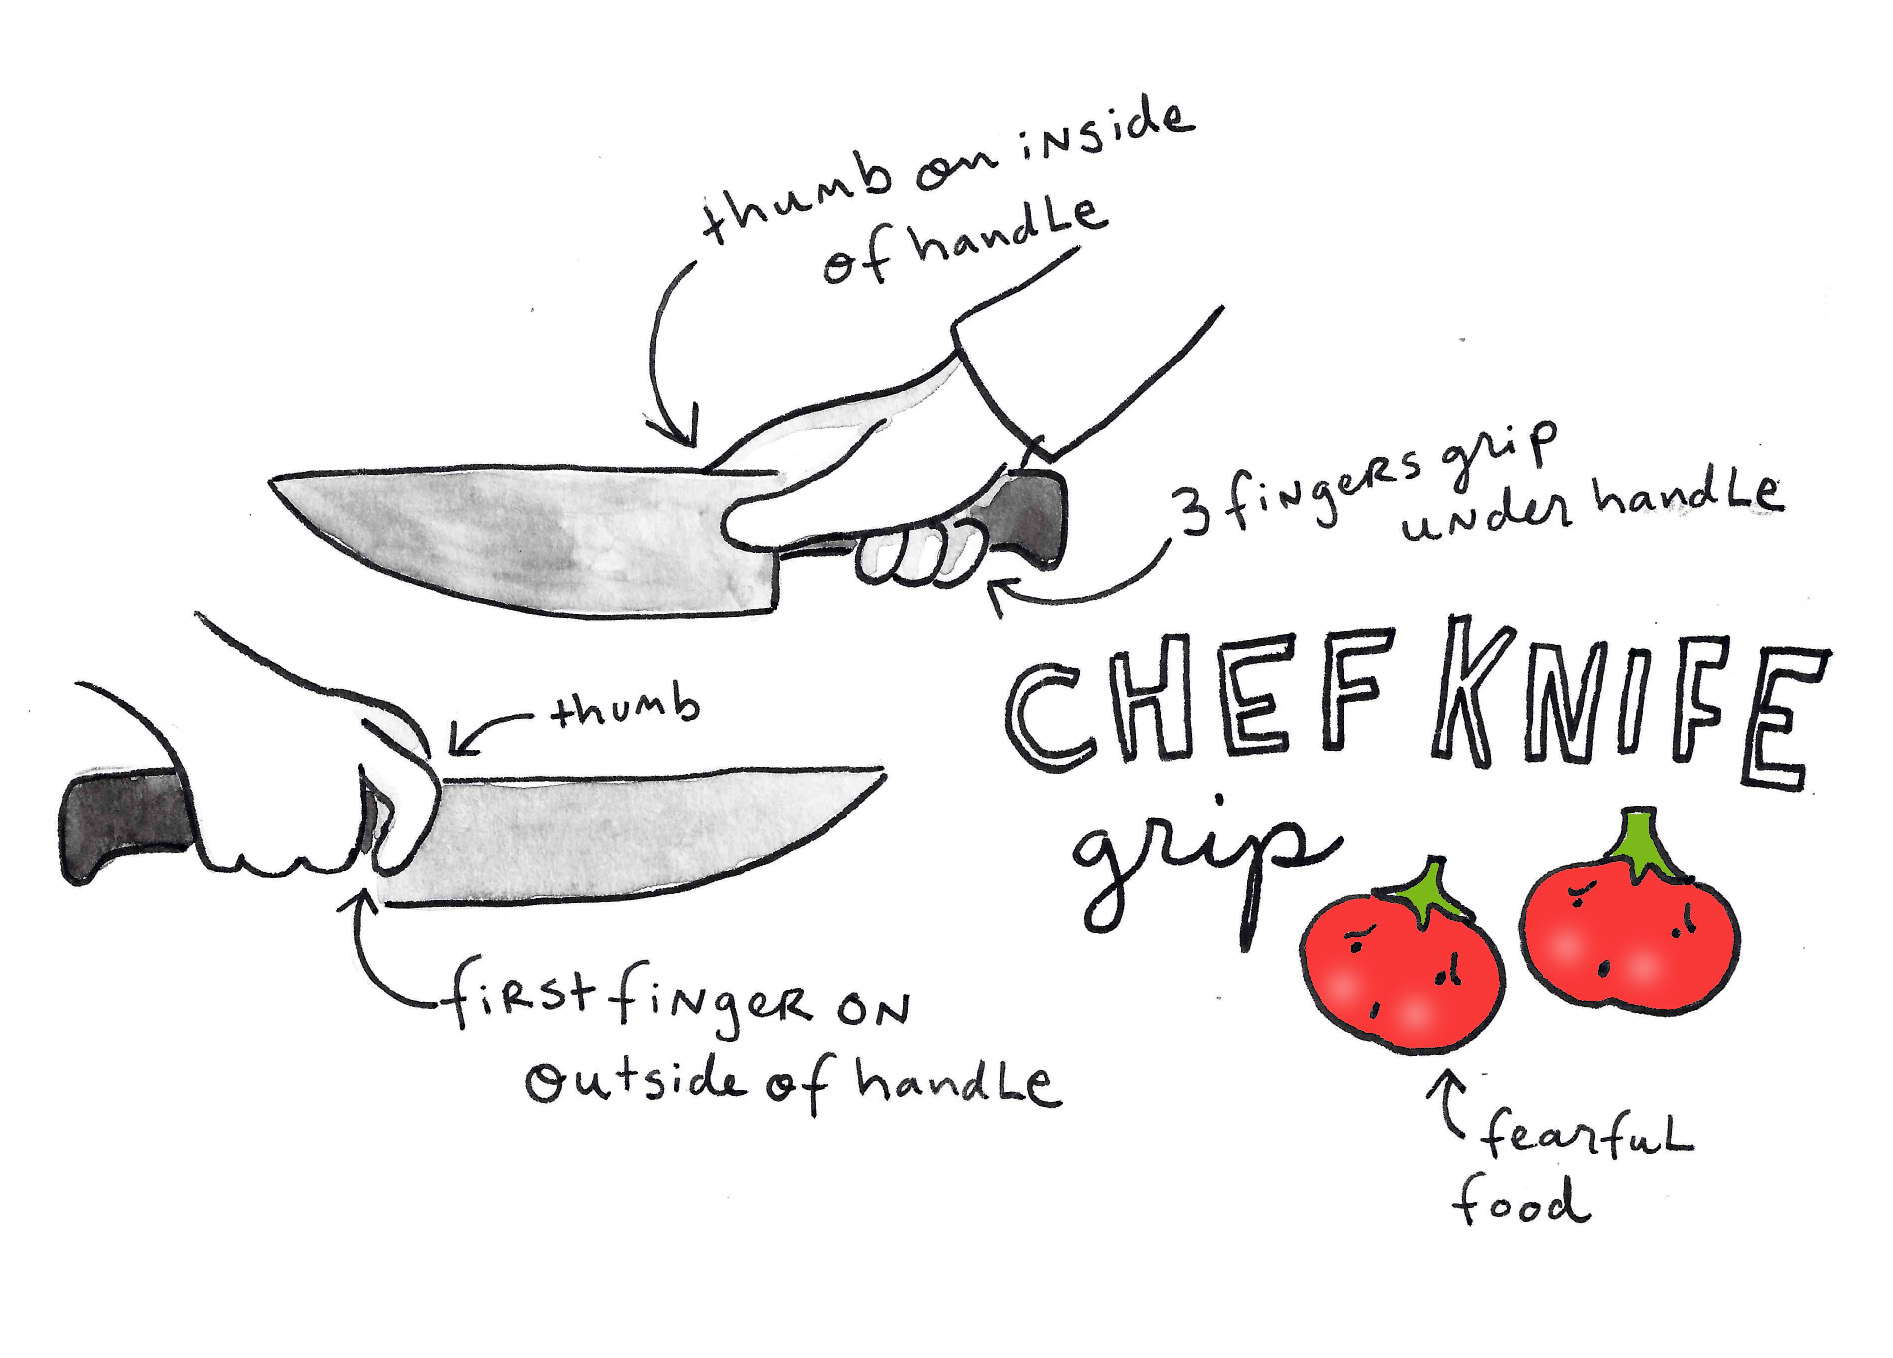 How to hold a chef knife